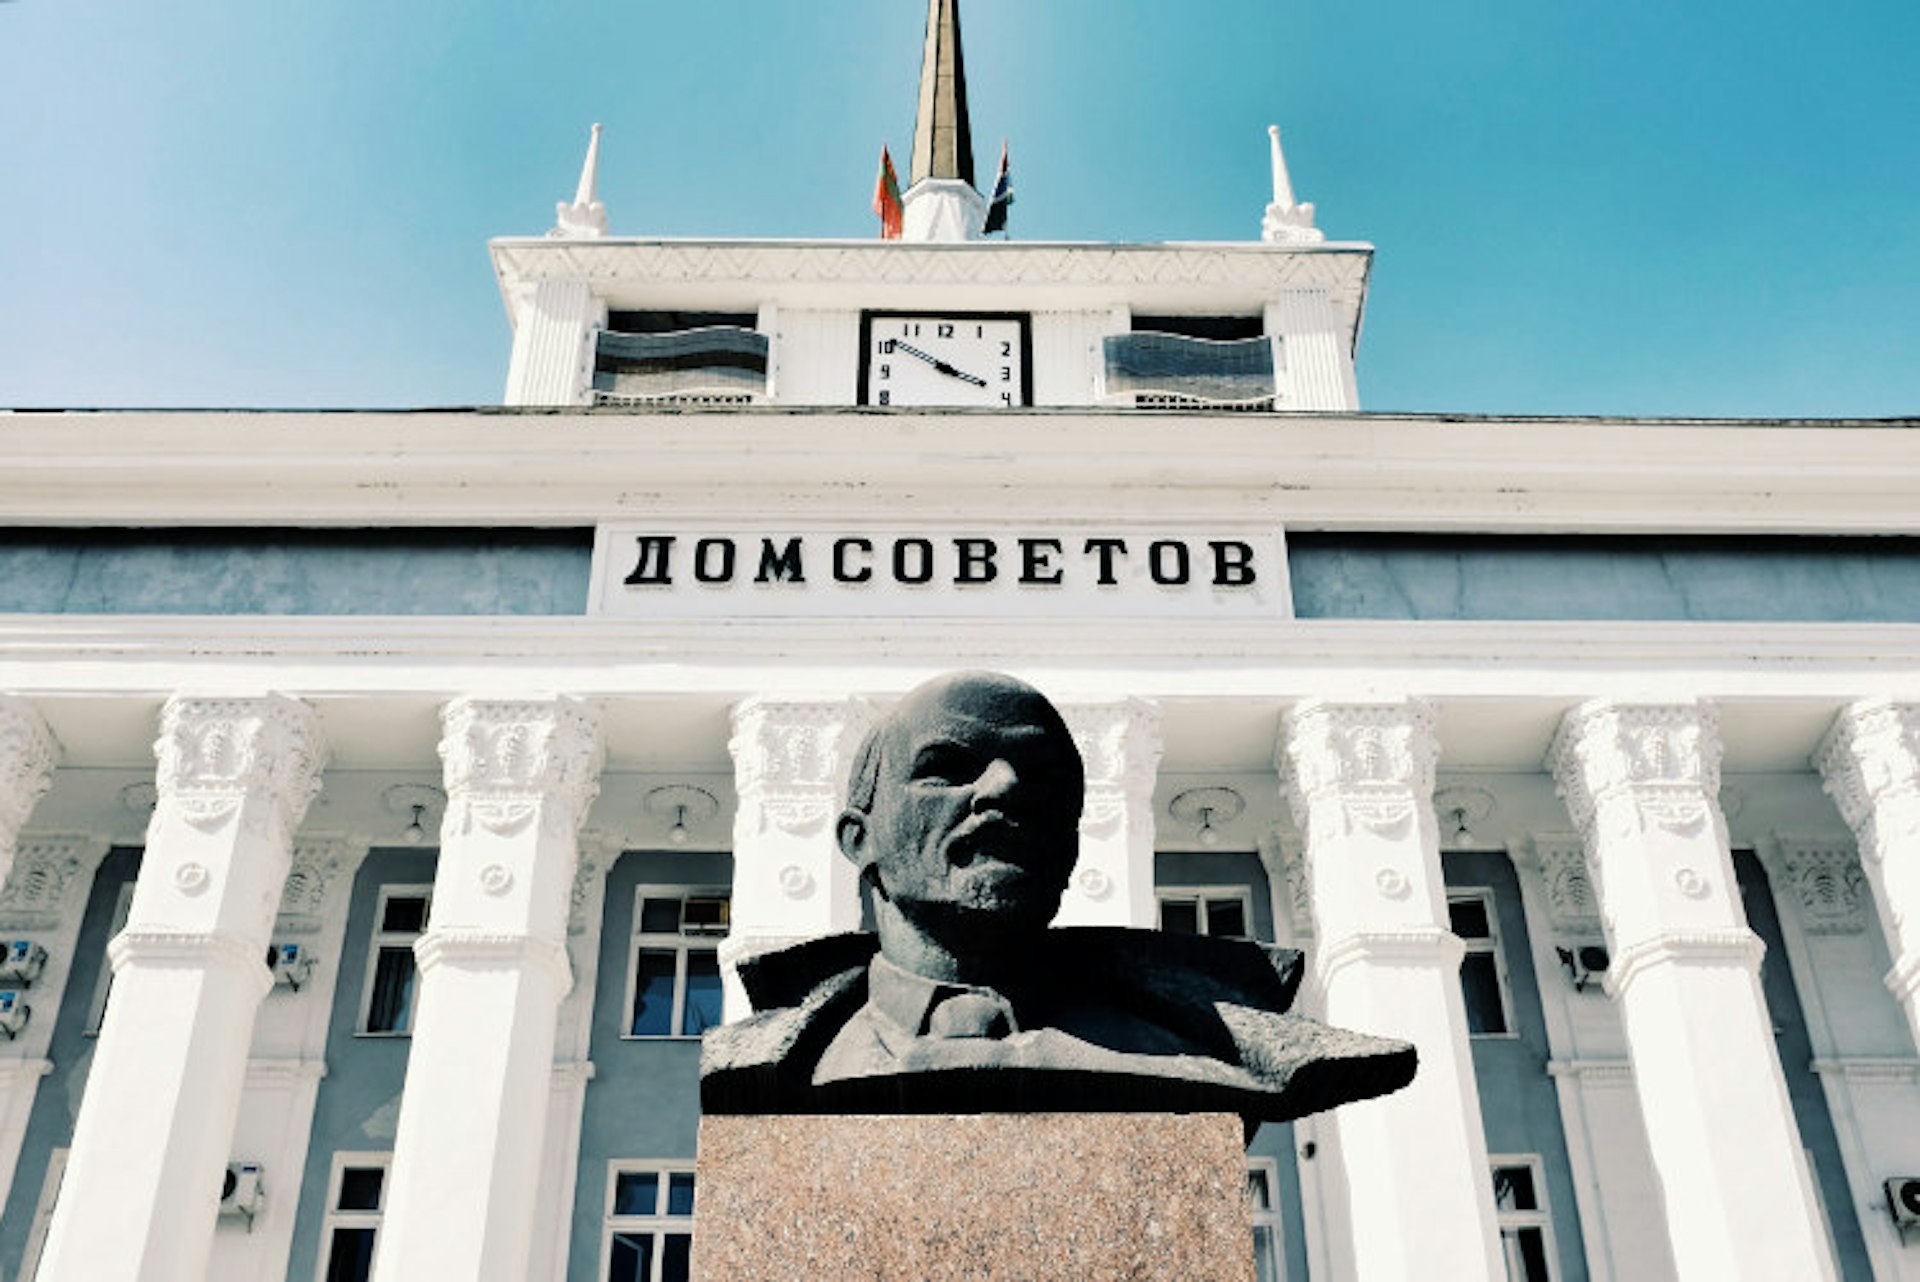 Lenin’s stern visage in front of Tiraspol’s House of Soviets. Image by Mark Baker / Lonely Planet